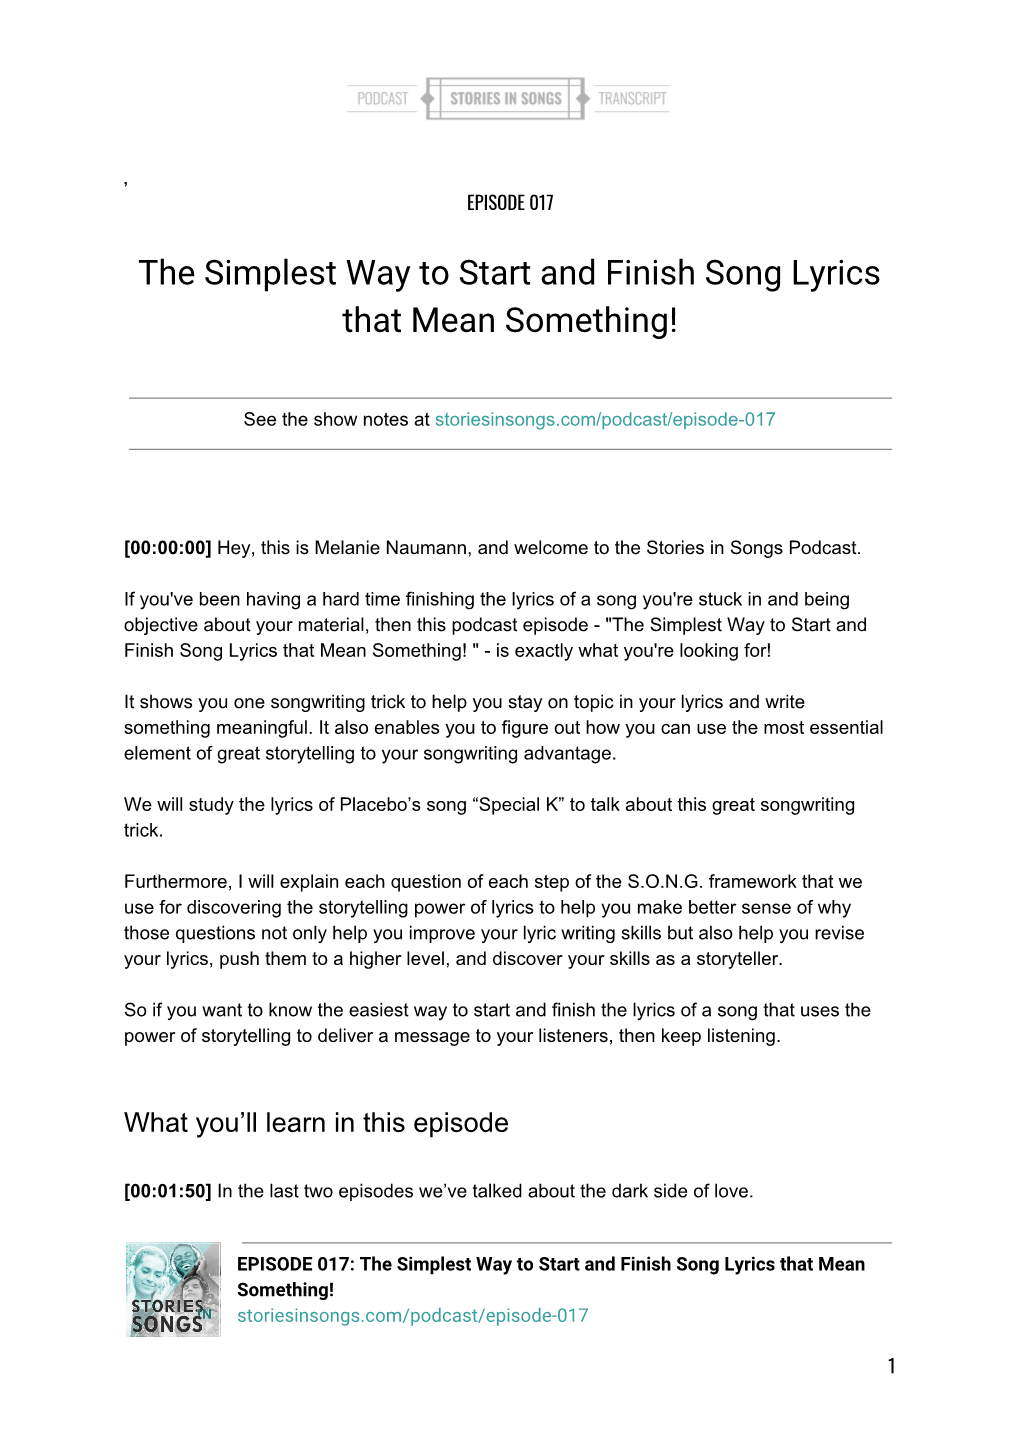 The Simplest Way to Start and Finish Song Lyrics That Mean Something!